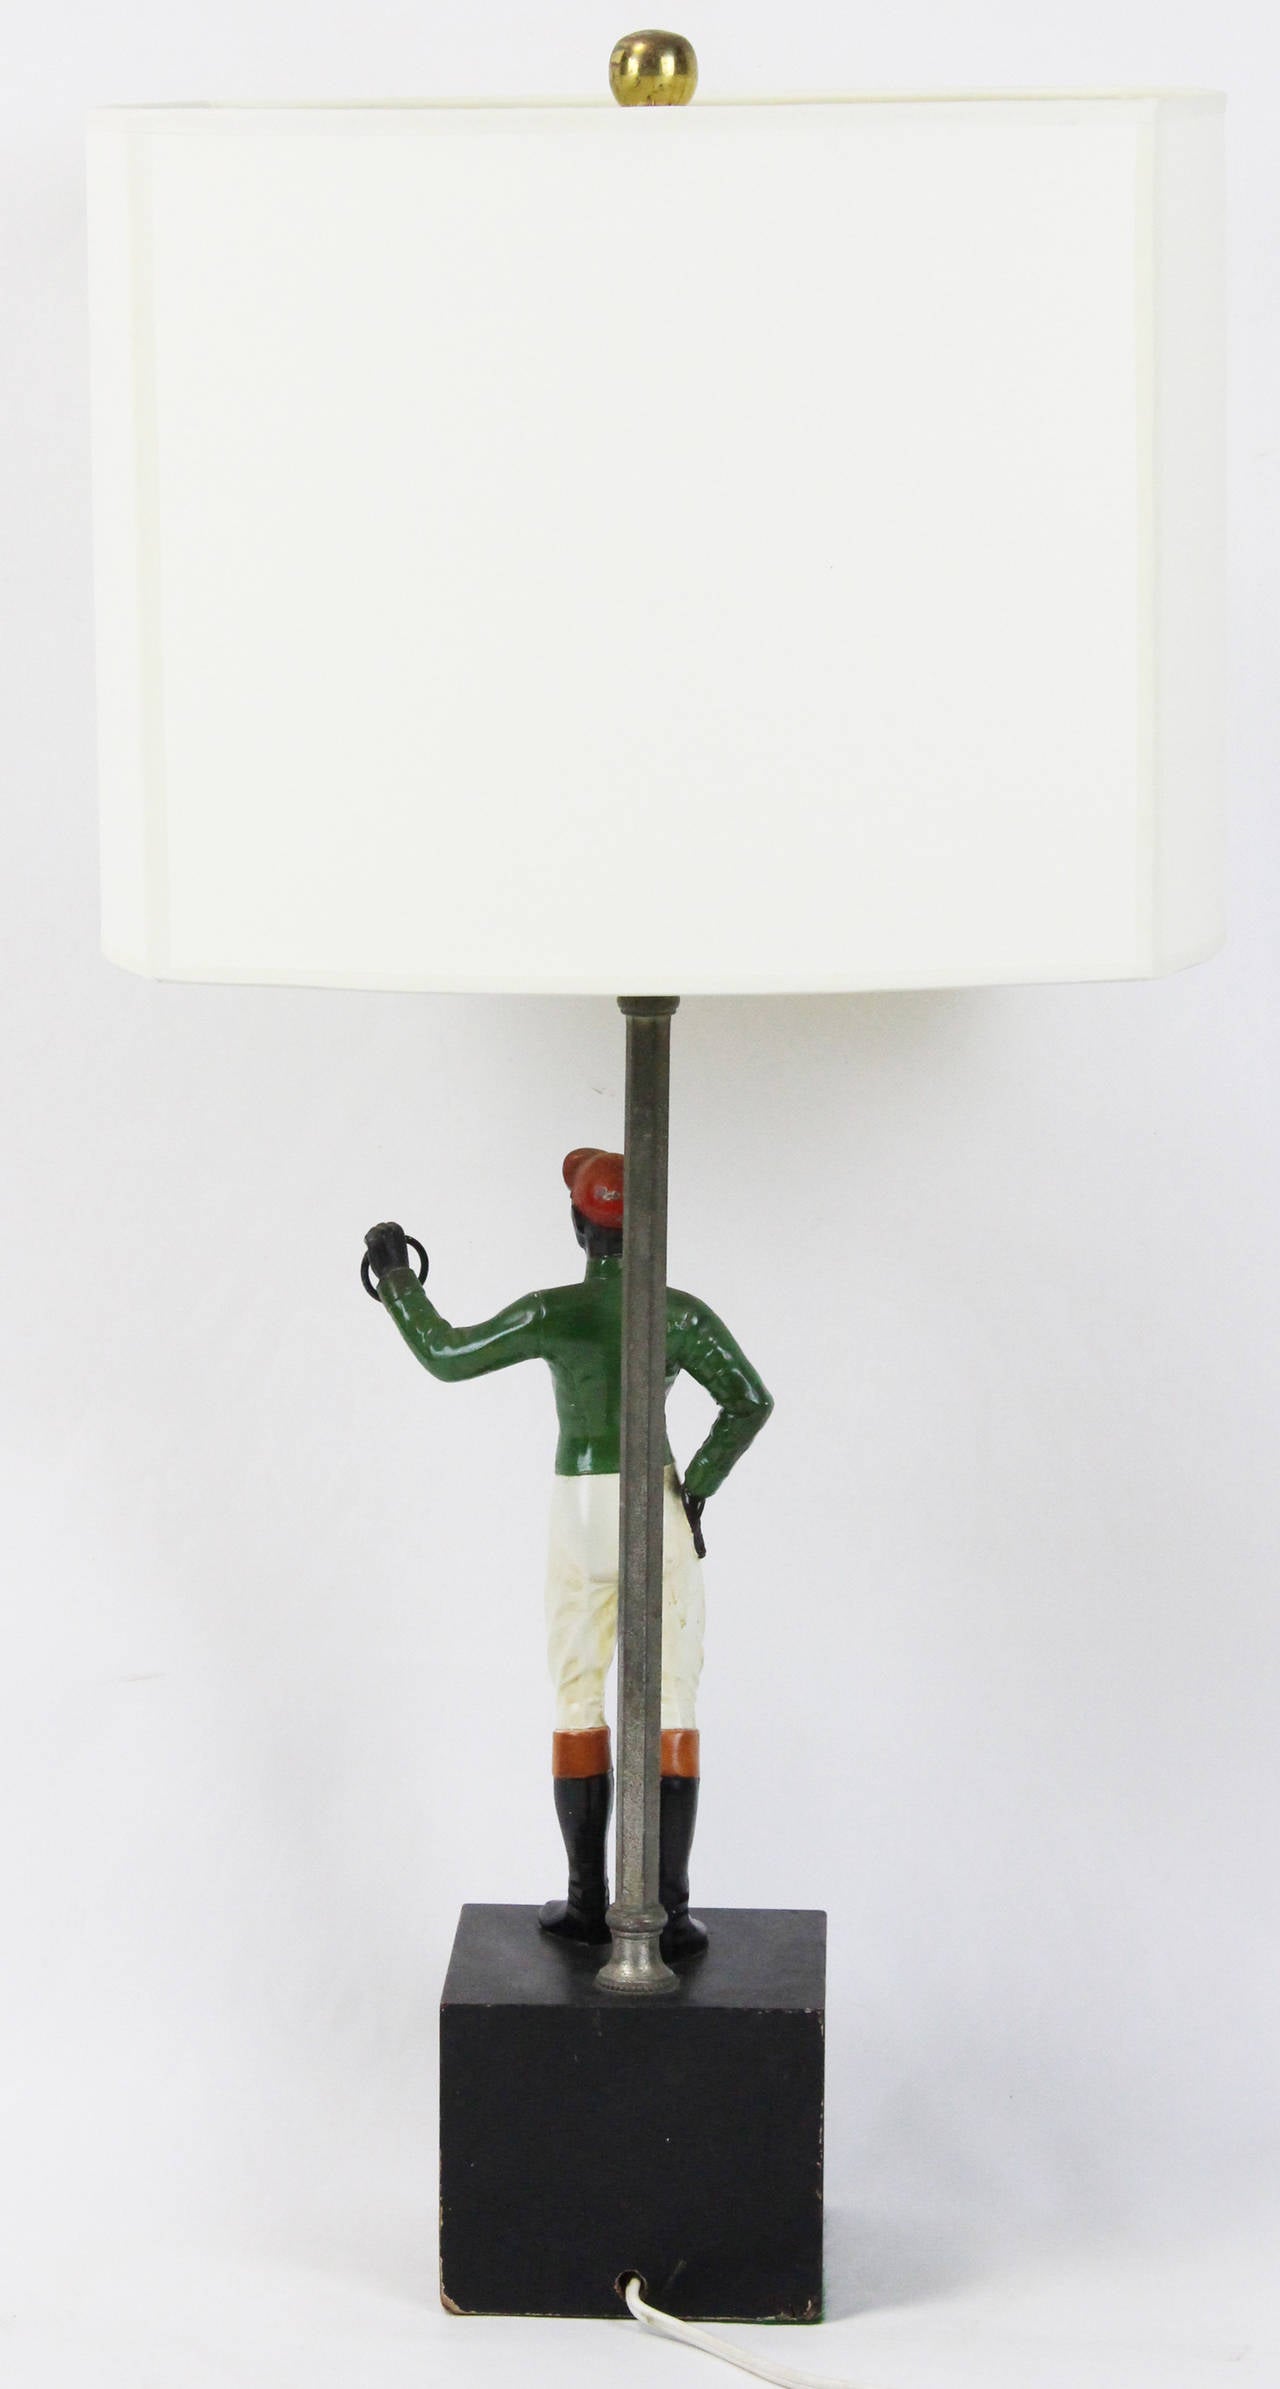 A very charming and high quality painted cast metal jockey standing on a wooden base fashioned into a lamp.